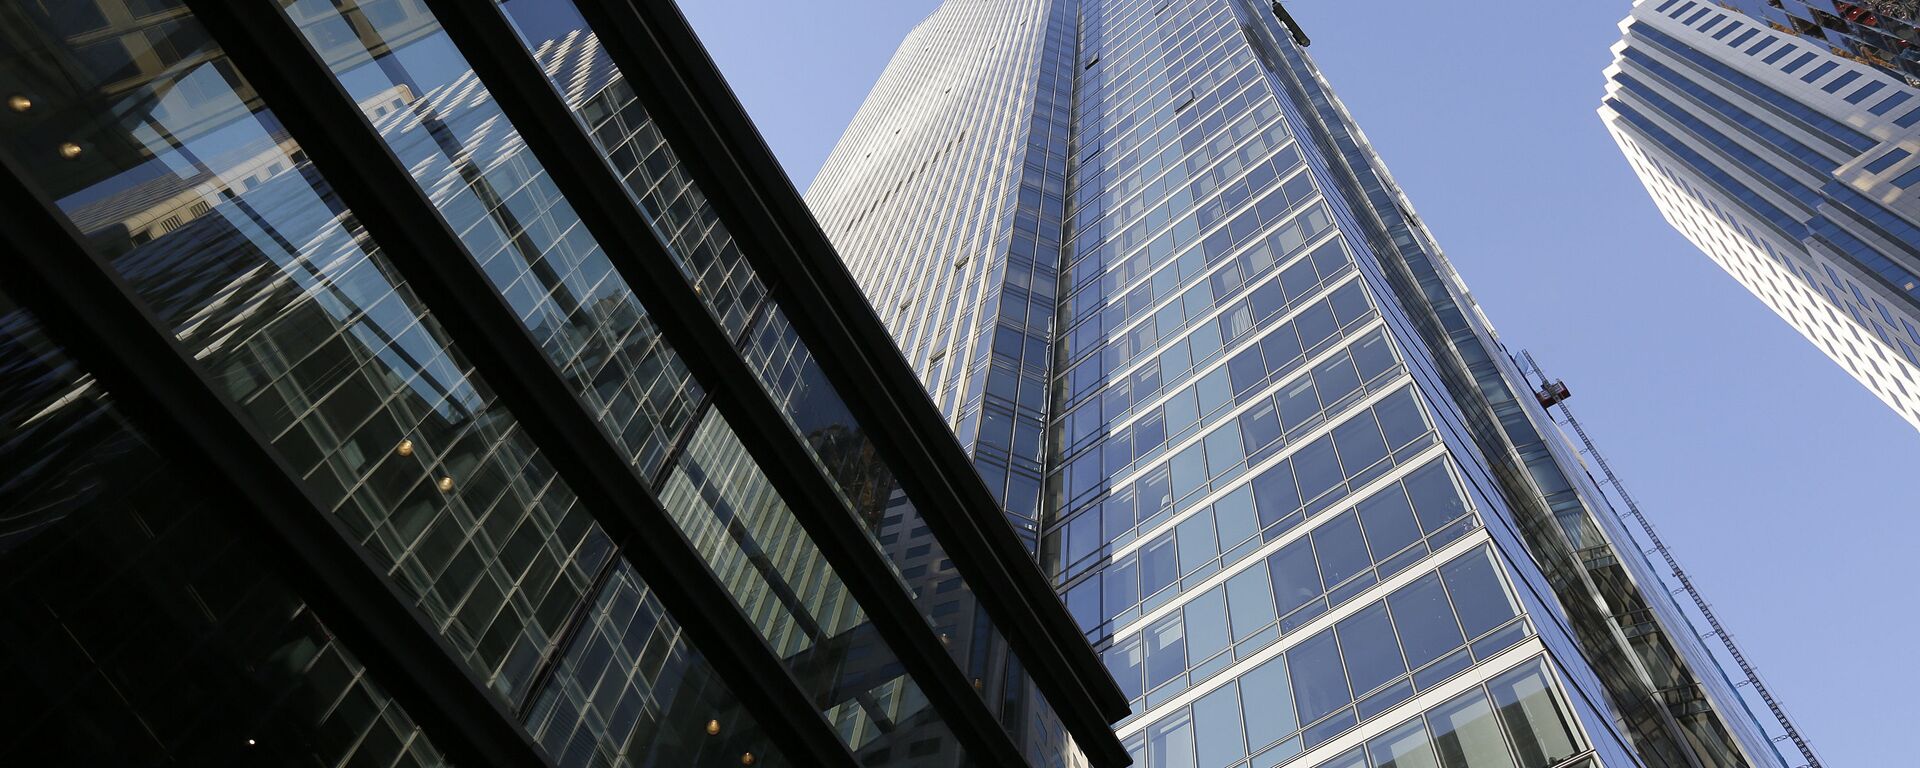 This Sept. 26, 2016 file photo shows the Millennium Tower in San Francisco. San Francisco building officials have issued another violation against the sinking Millennium Tower after city-ordered inspection crews found another cracked window. KNTV of San Jose reported Tuesday, Oct. 23, 2018, the latest cracked window was found during an inspection last week. The television station first reported a window cracked unexpectedly on the 36th floor of the troubled high-rise over Labor Day. (AP Photo/Eric Risberg, File) - Sputnik International, 1920, 12.01.2022